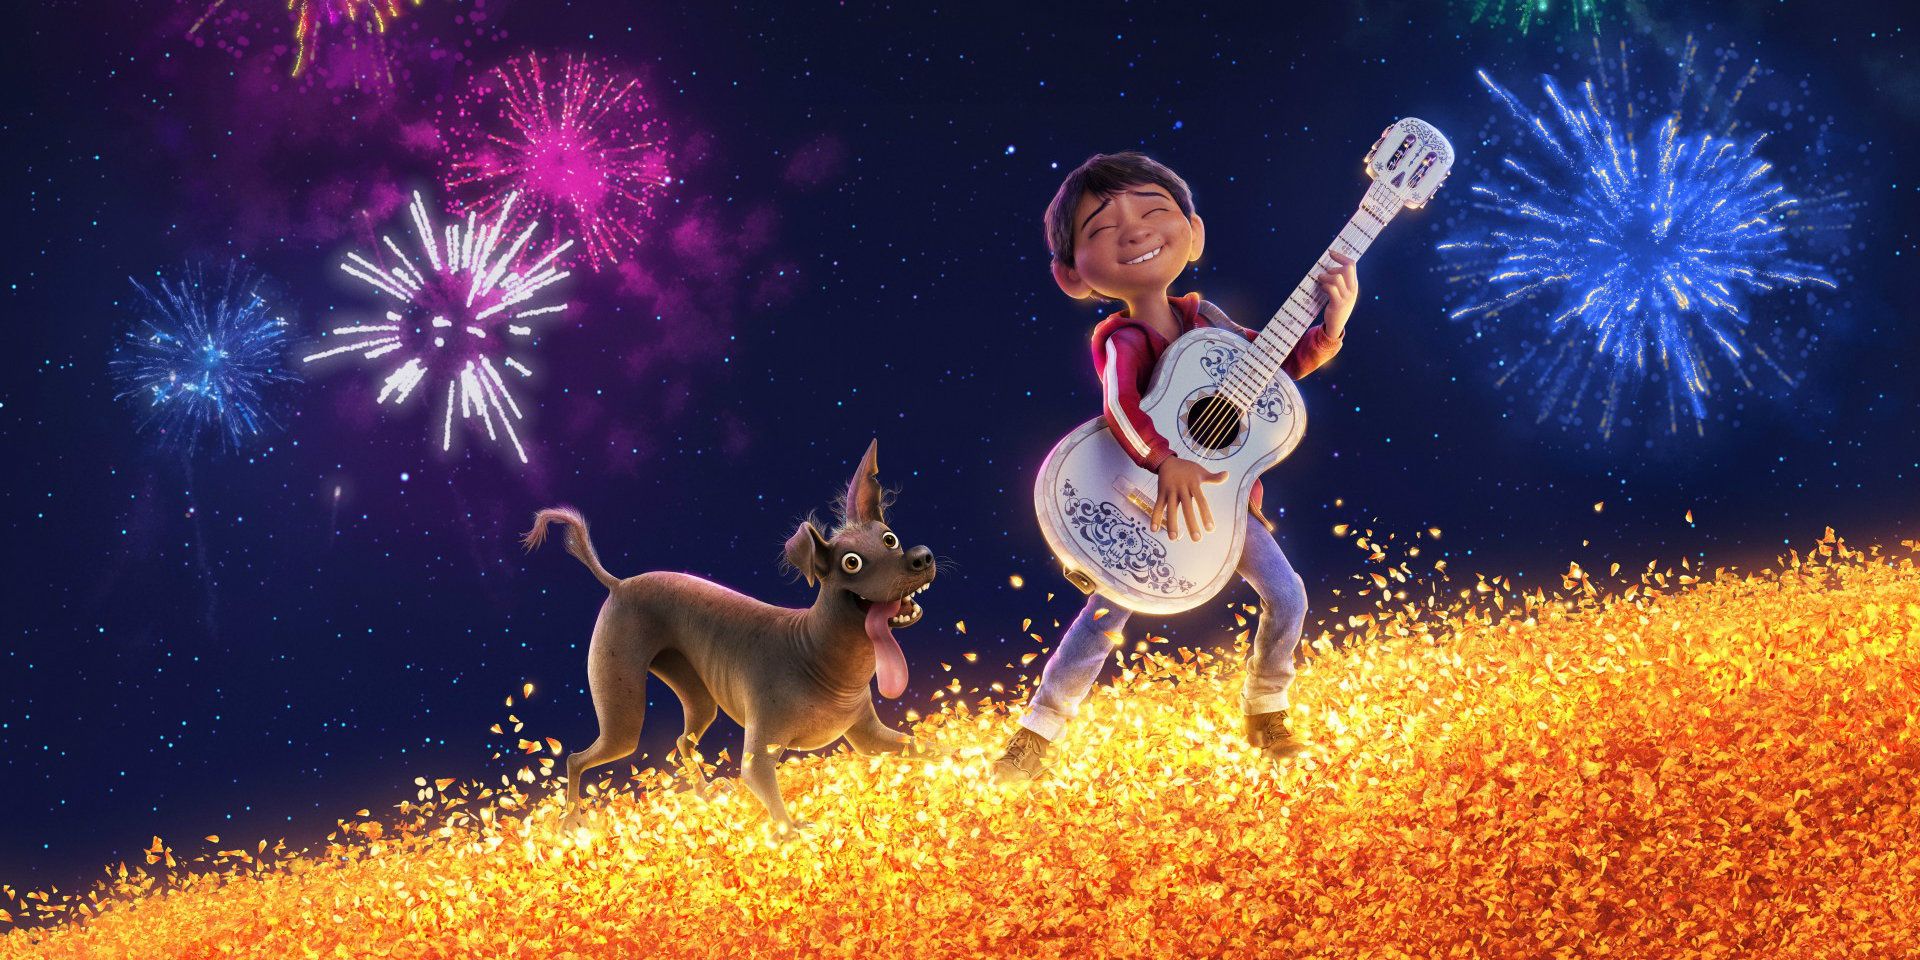 Miguel and his dog in Coco